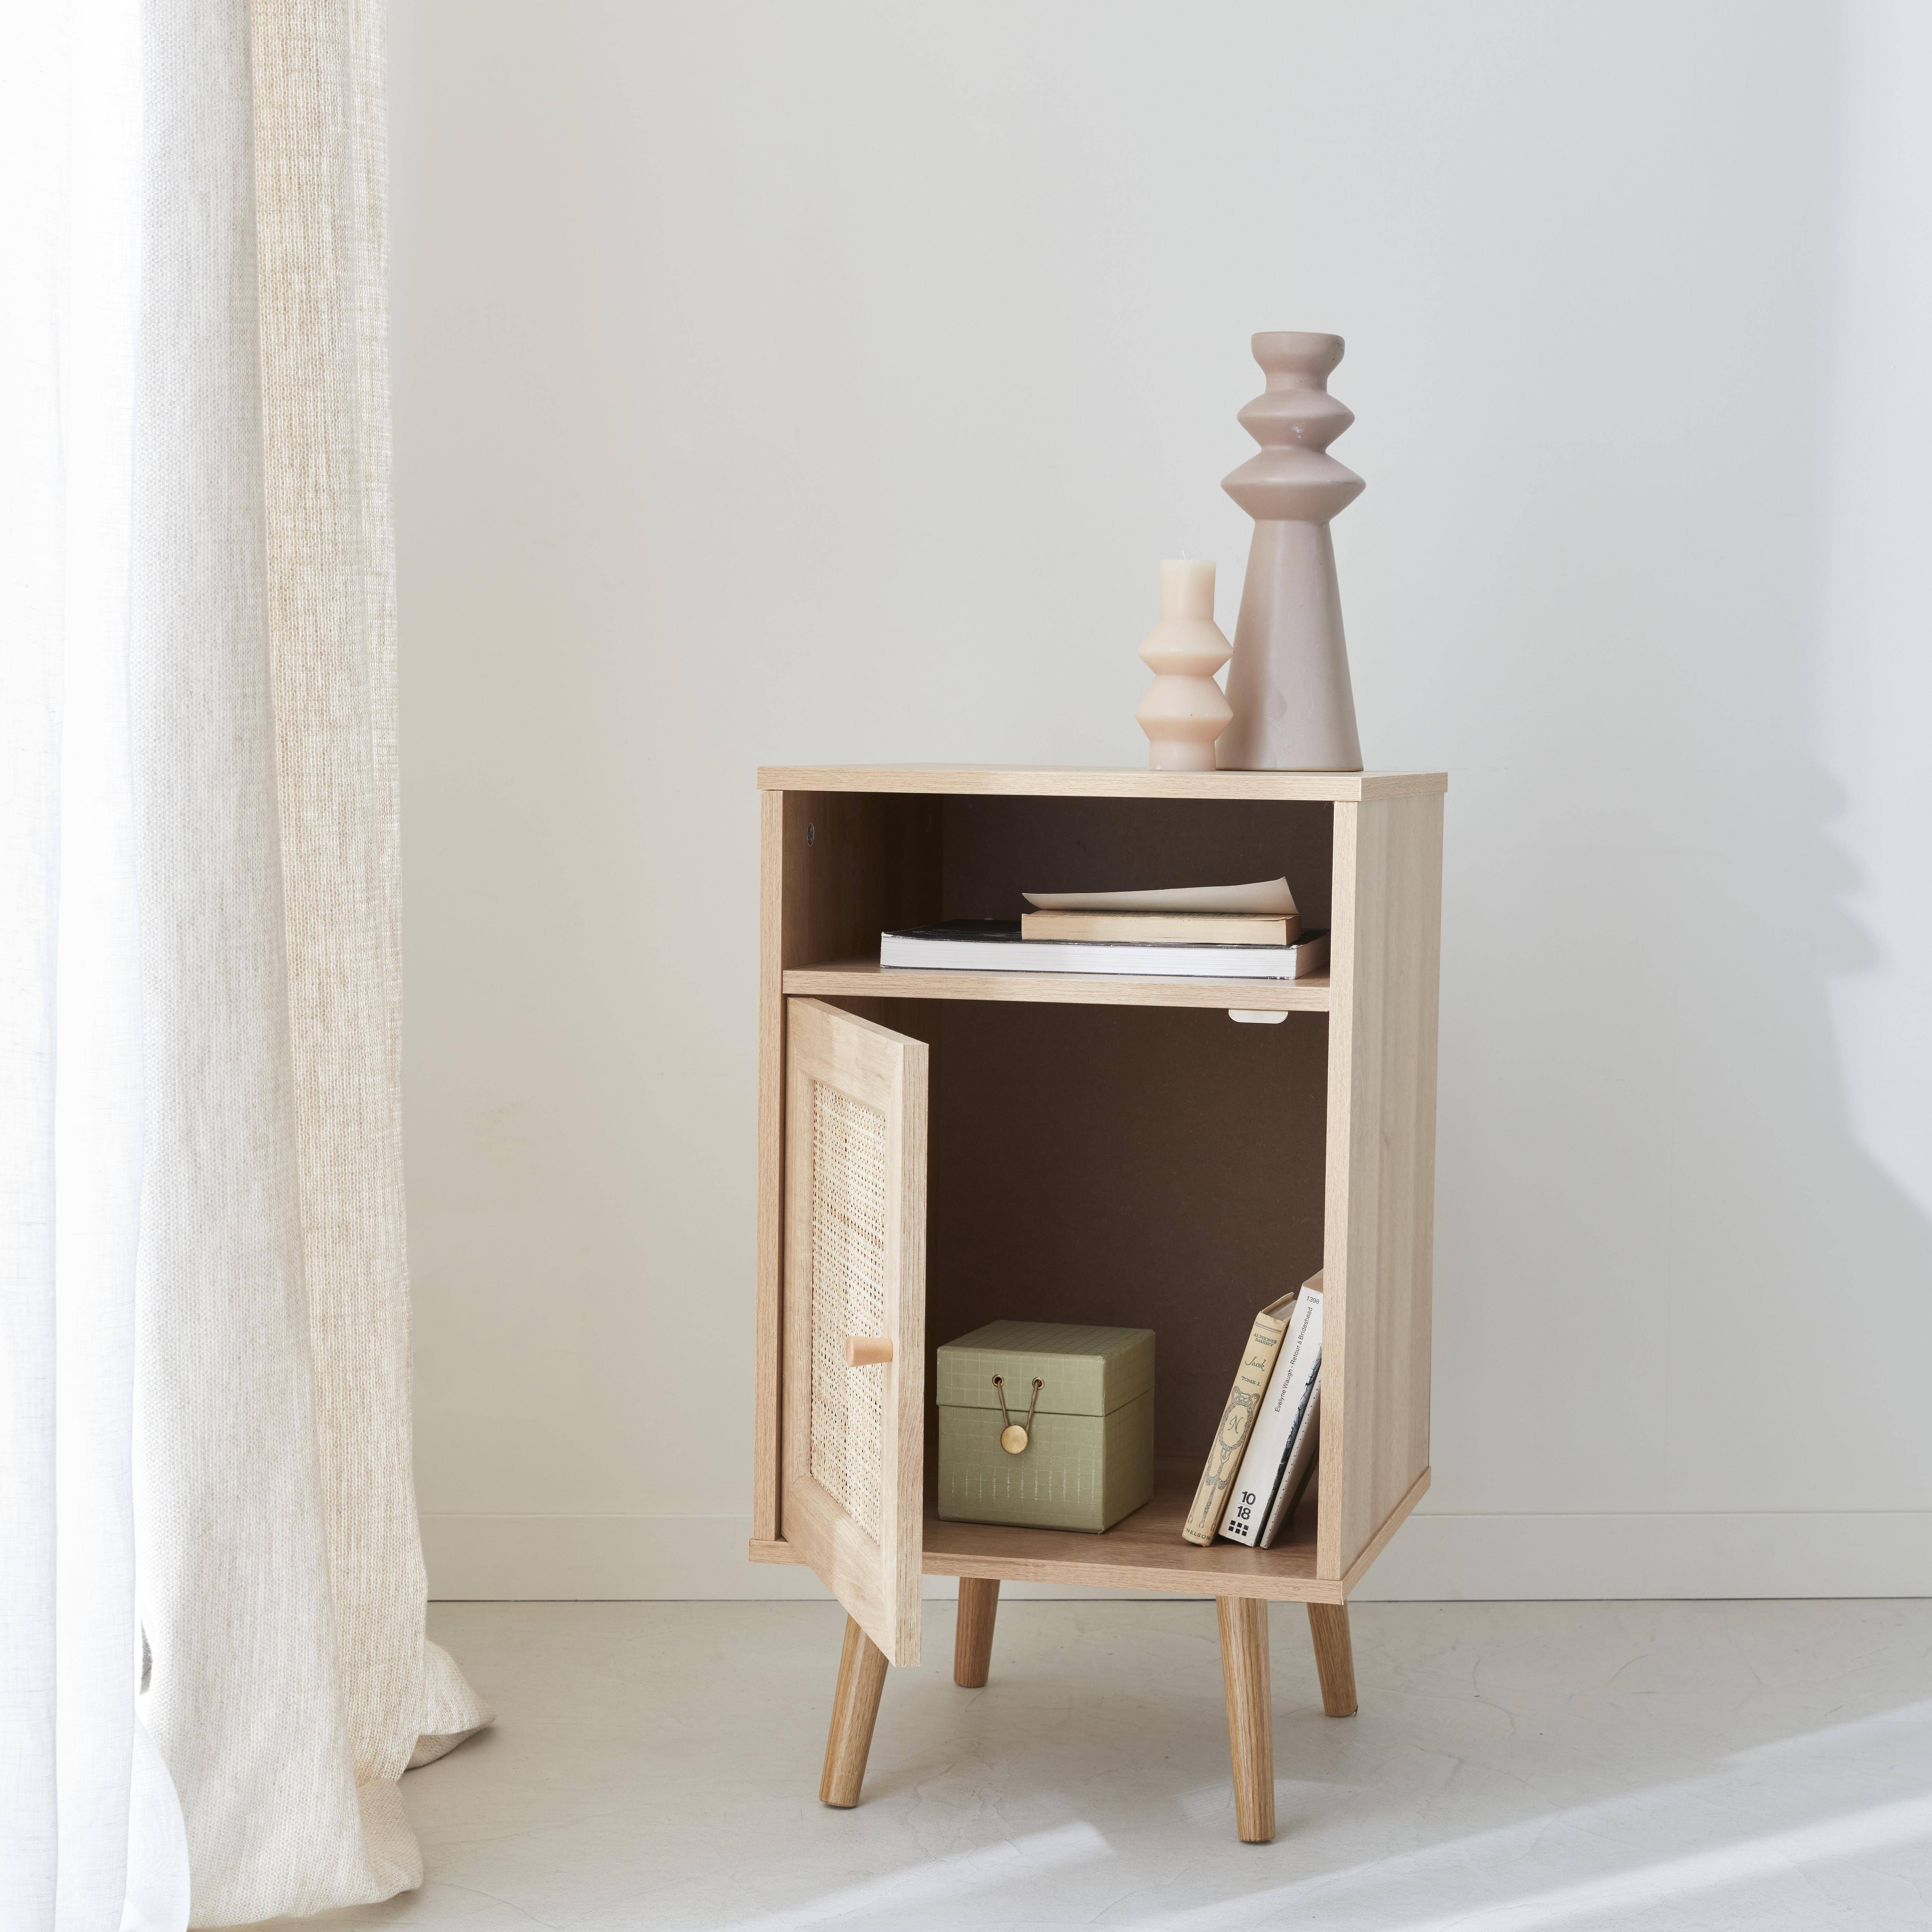 Pair of Scandi-style wood and cane rattan bedside tables with cupboard, 40x39x70cm - Boheme - Natural Wood colour Photo3